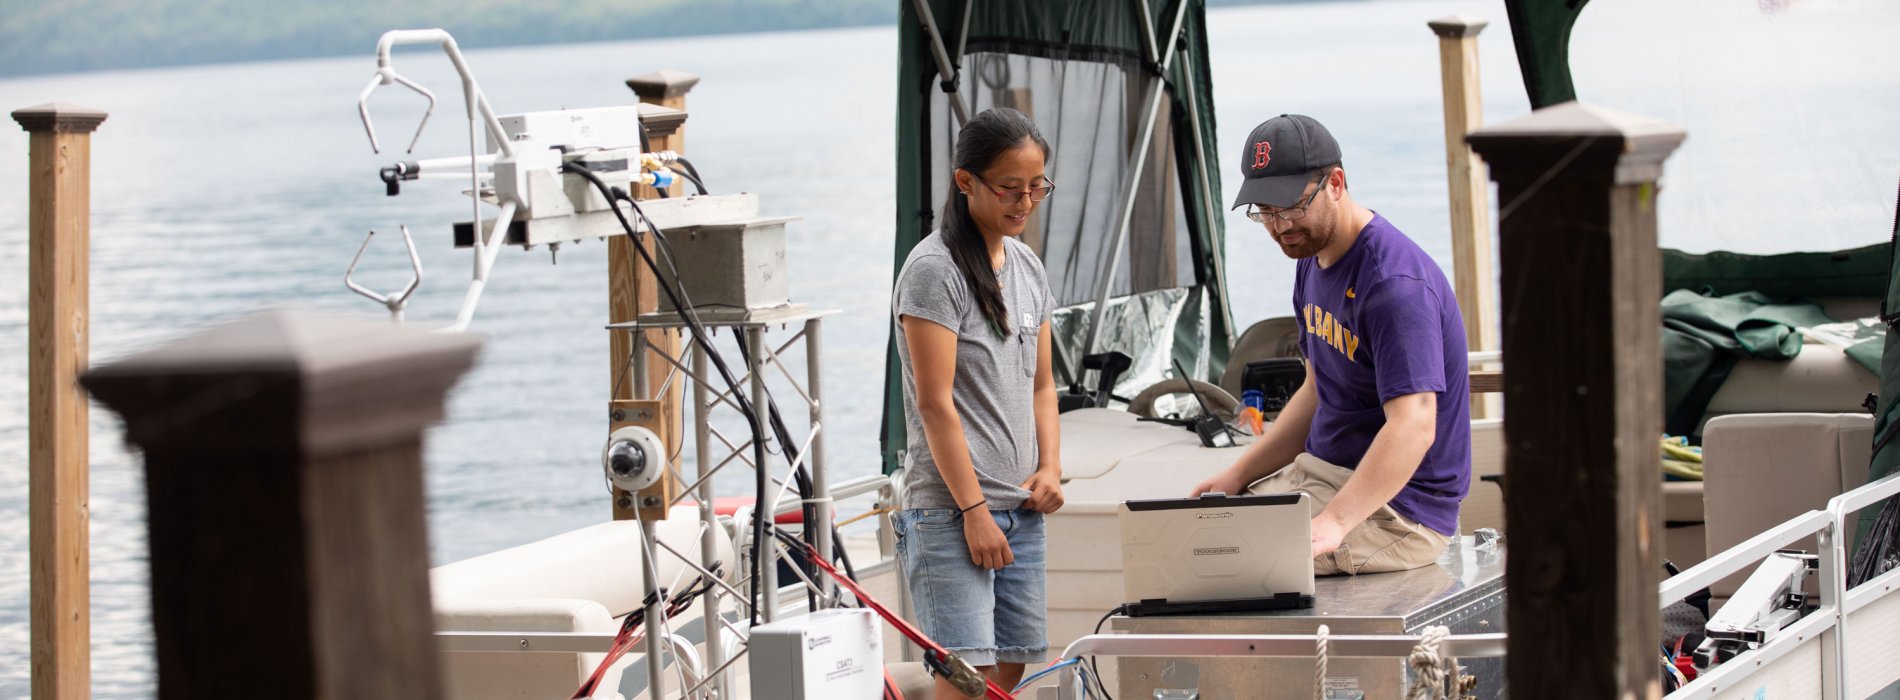 A graduate student and a researcher look at a computer monitor while taking measurements from a boat on Lake George.